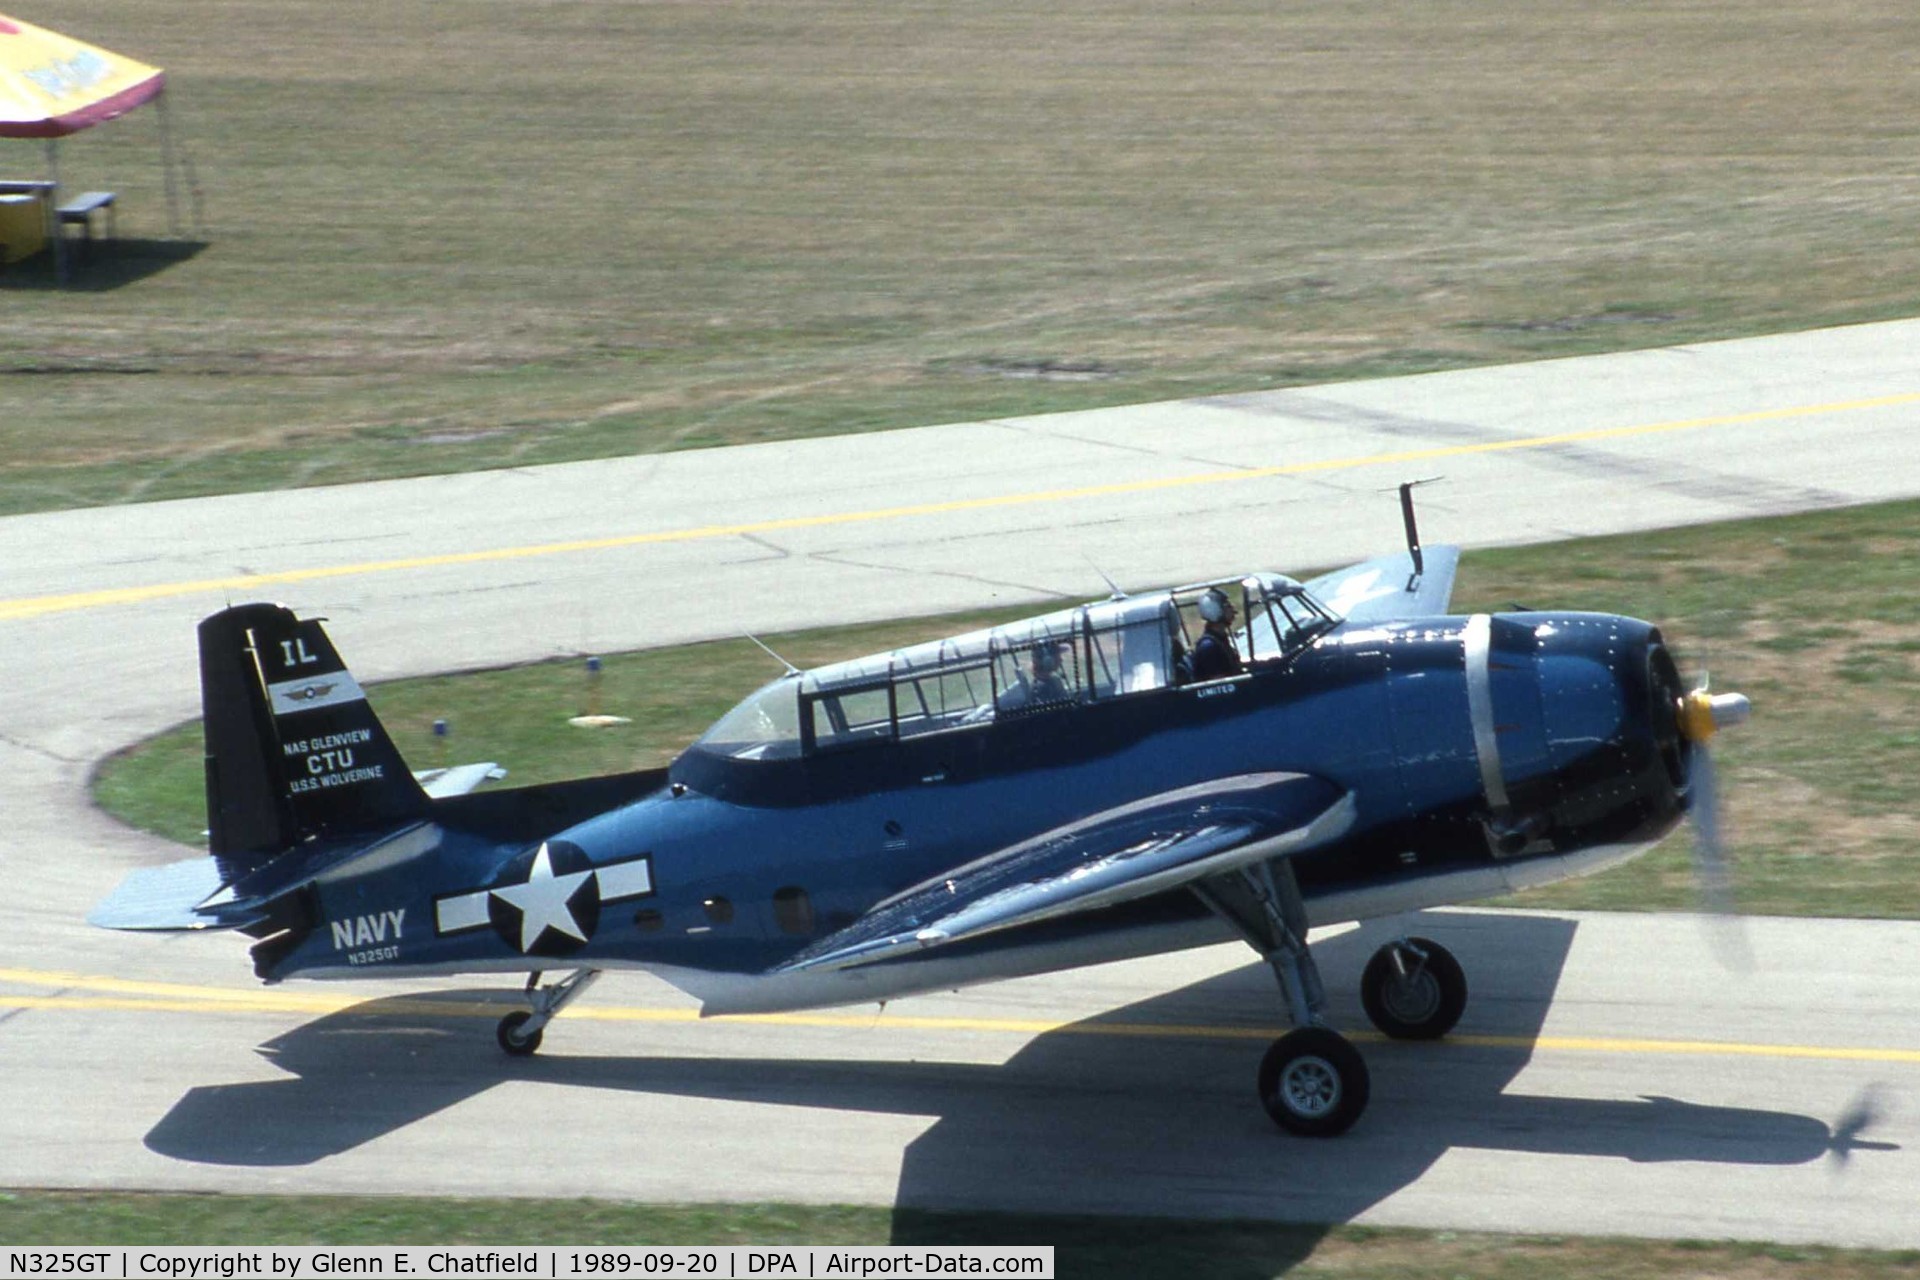 N325GT, Grumman TBM-3E Avenger C/N 69325, New paint, taxiing by the control tower